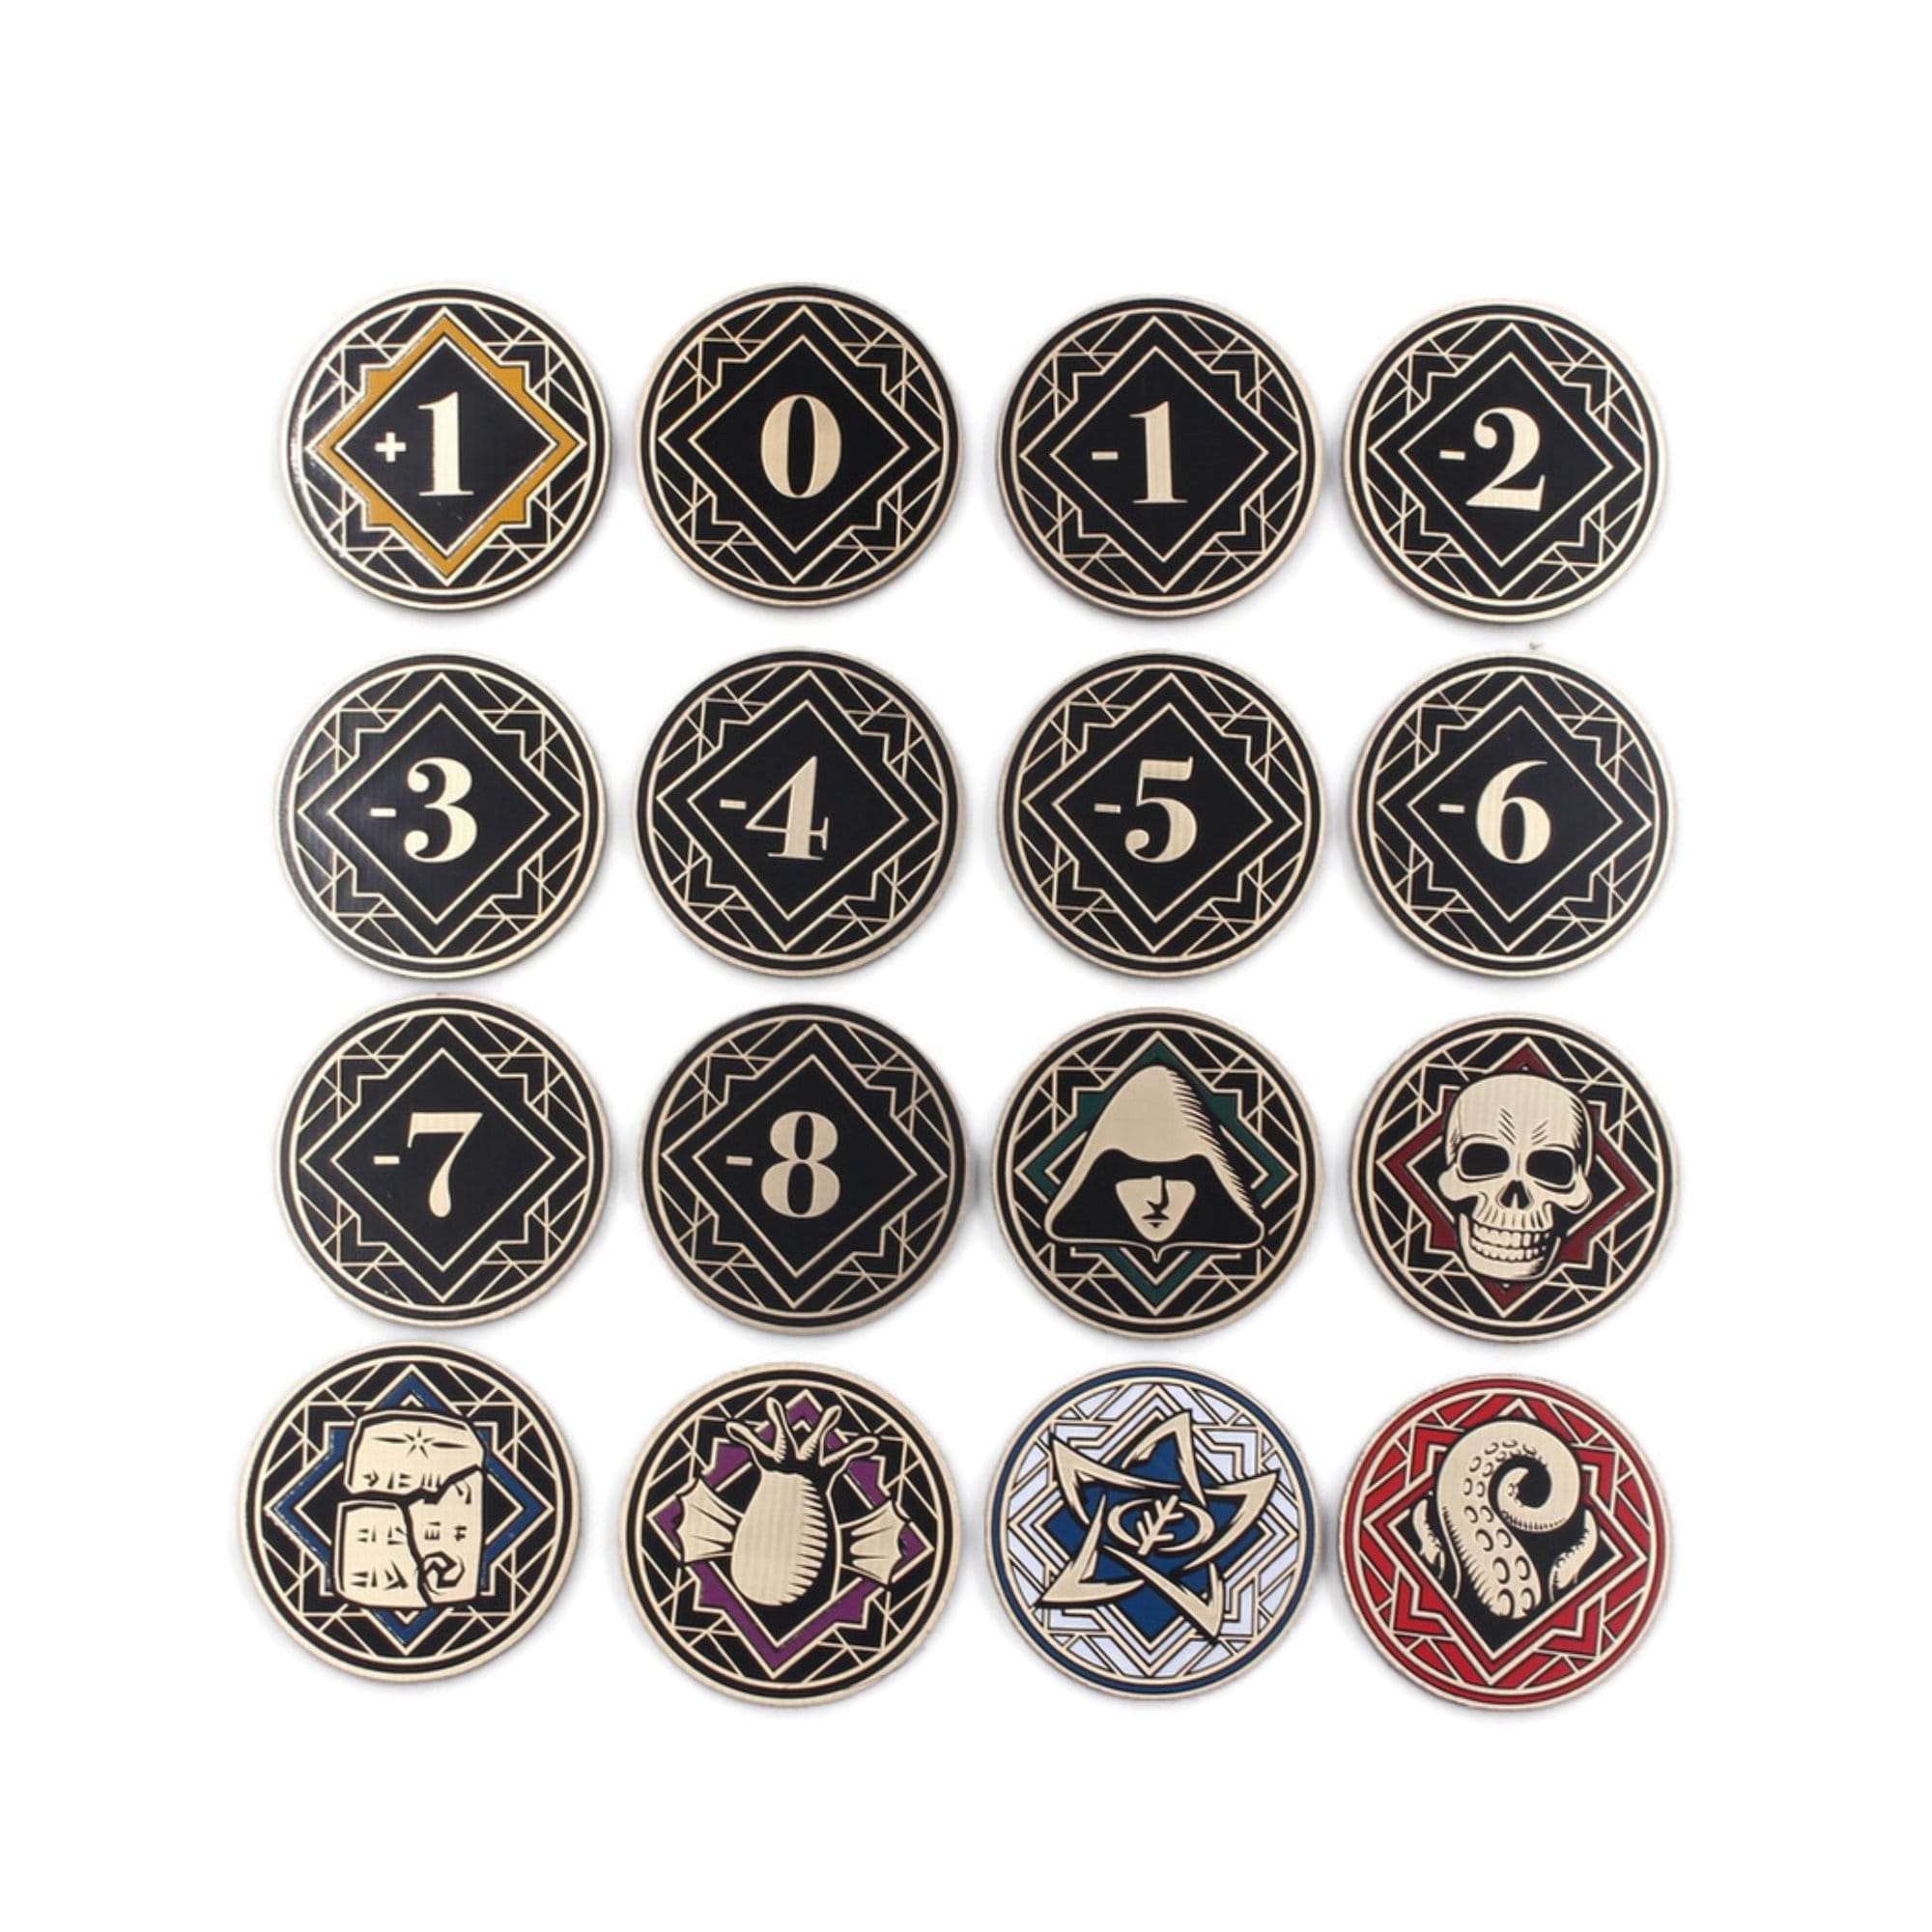 Arkham Horror LCG Chaos Tokens - Full Core Pack | Fan-Made Compatibles from Aurbits for the Mythos